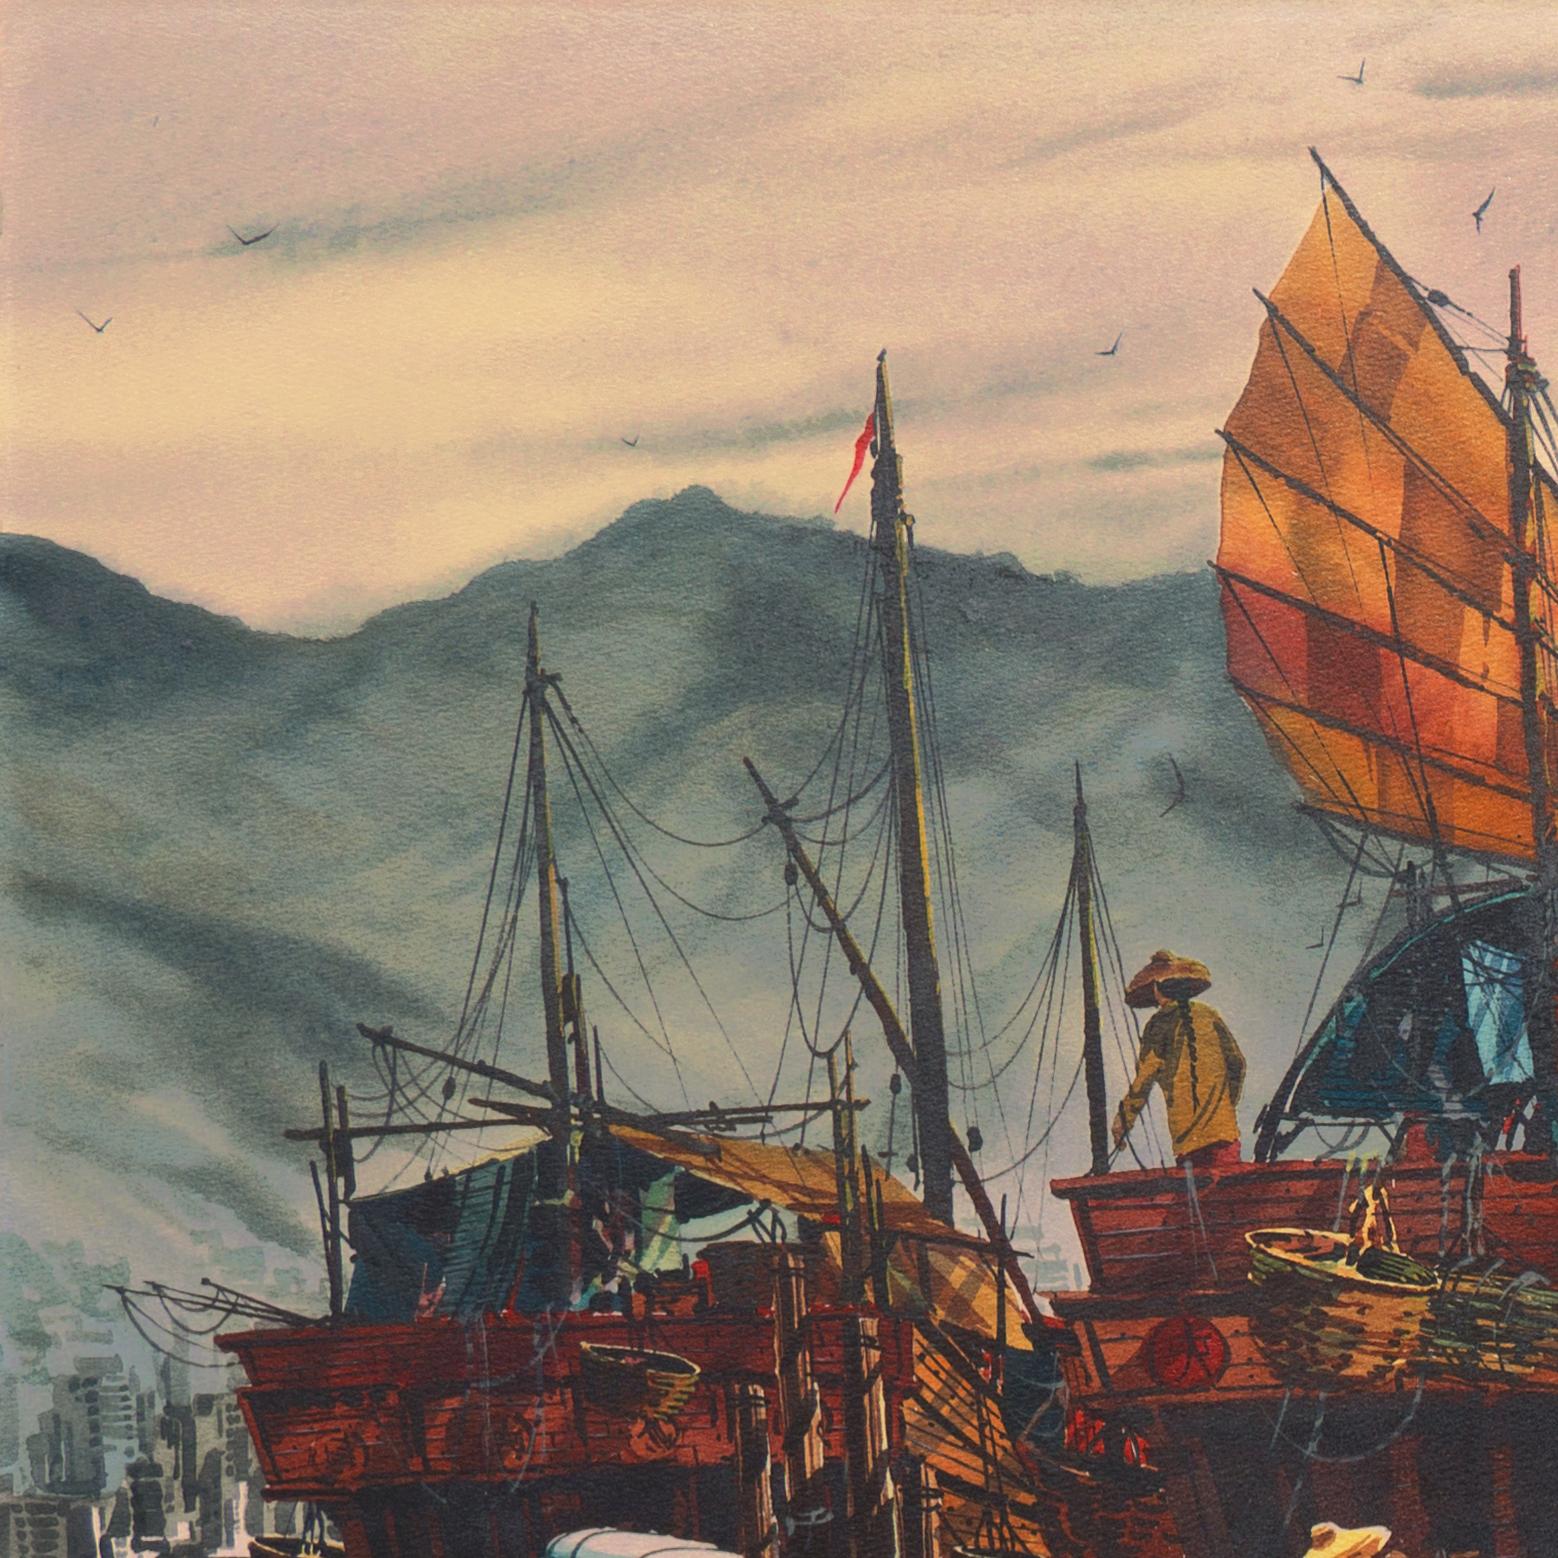 Signed lower right, 'Frank M. Hamilton' for Frank Moss Hamilton (American, 1930-1999) and painted circa 1965. Titled, verso, 'The Smugglers, Hong Kong' on artist card and inscribed, 'Kowloon, Hong Kong'.
Previously with: Galaxy Gallery, Phoenix,